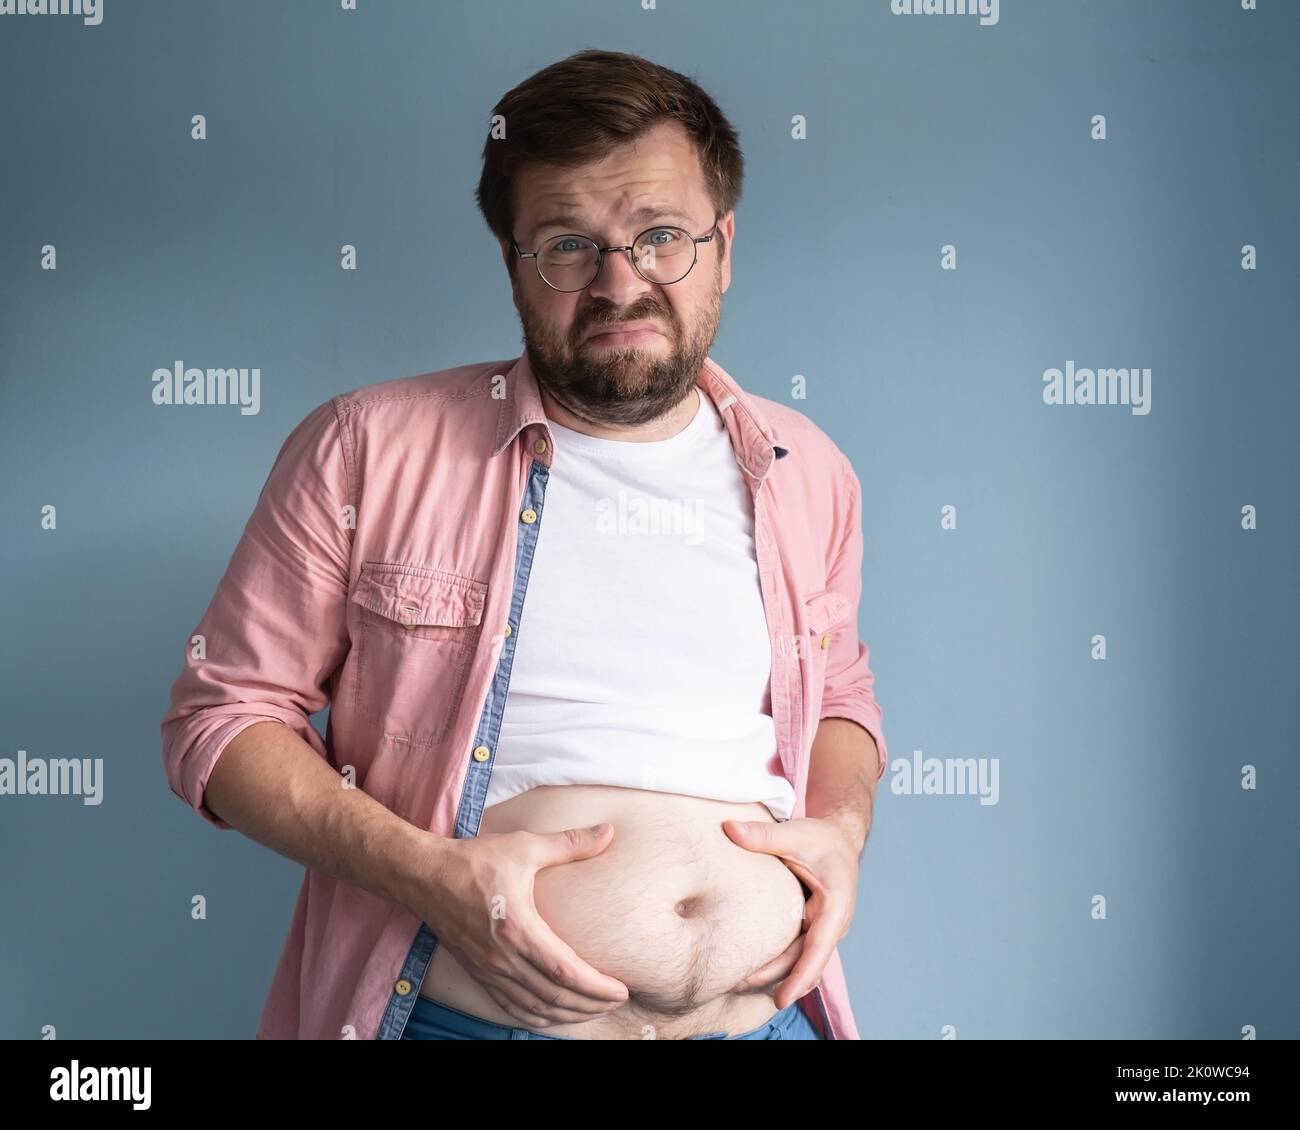 Unhappy, dissatisfied overweight man, lifted t-shirt and holds excess belly fat with his hands. Healthy lifestyle concept. Stock Photo